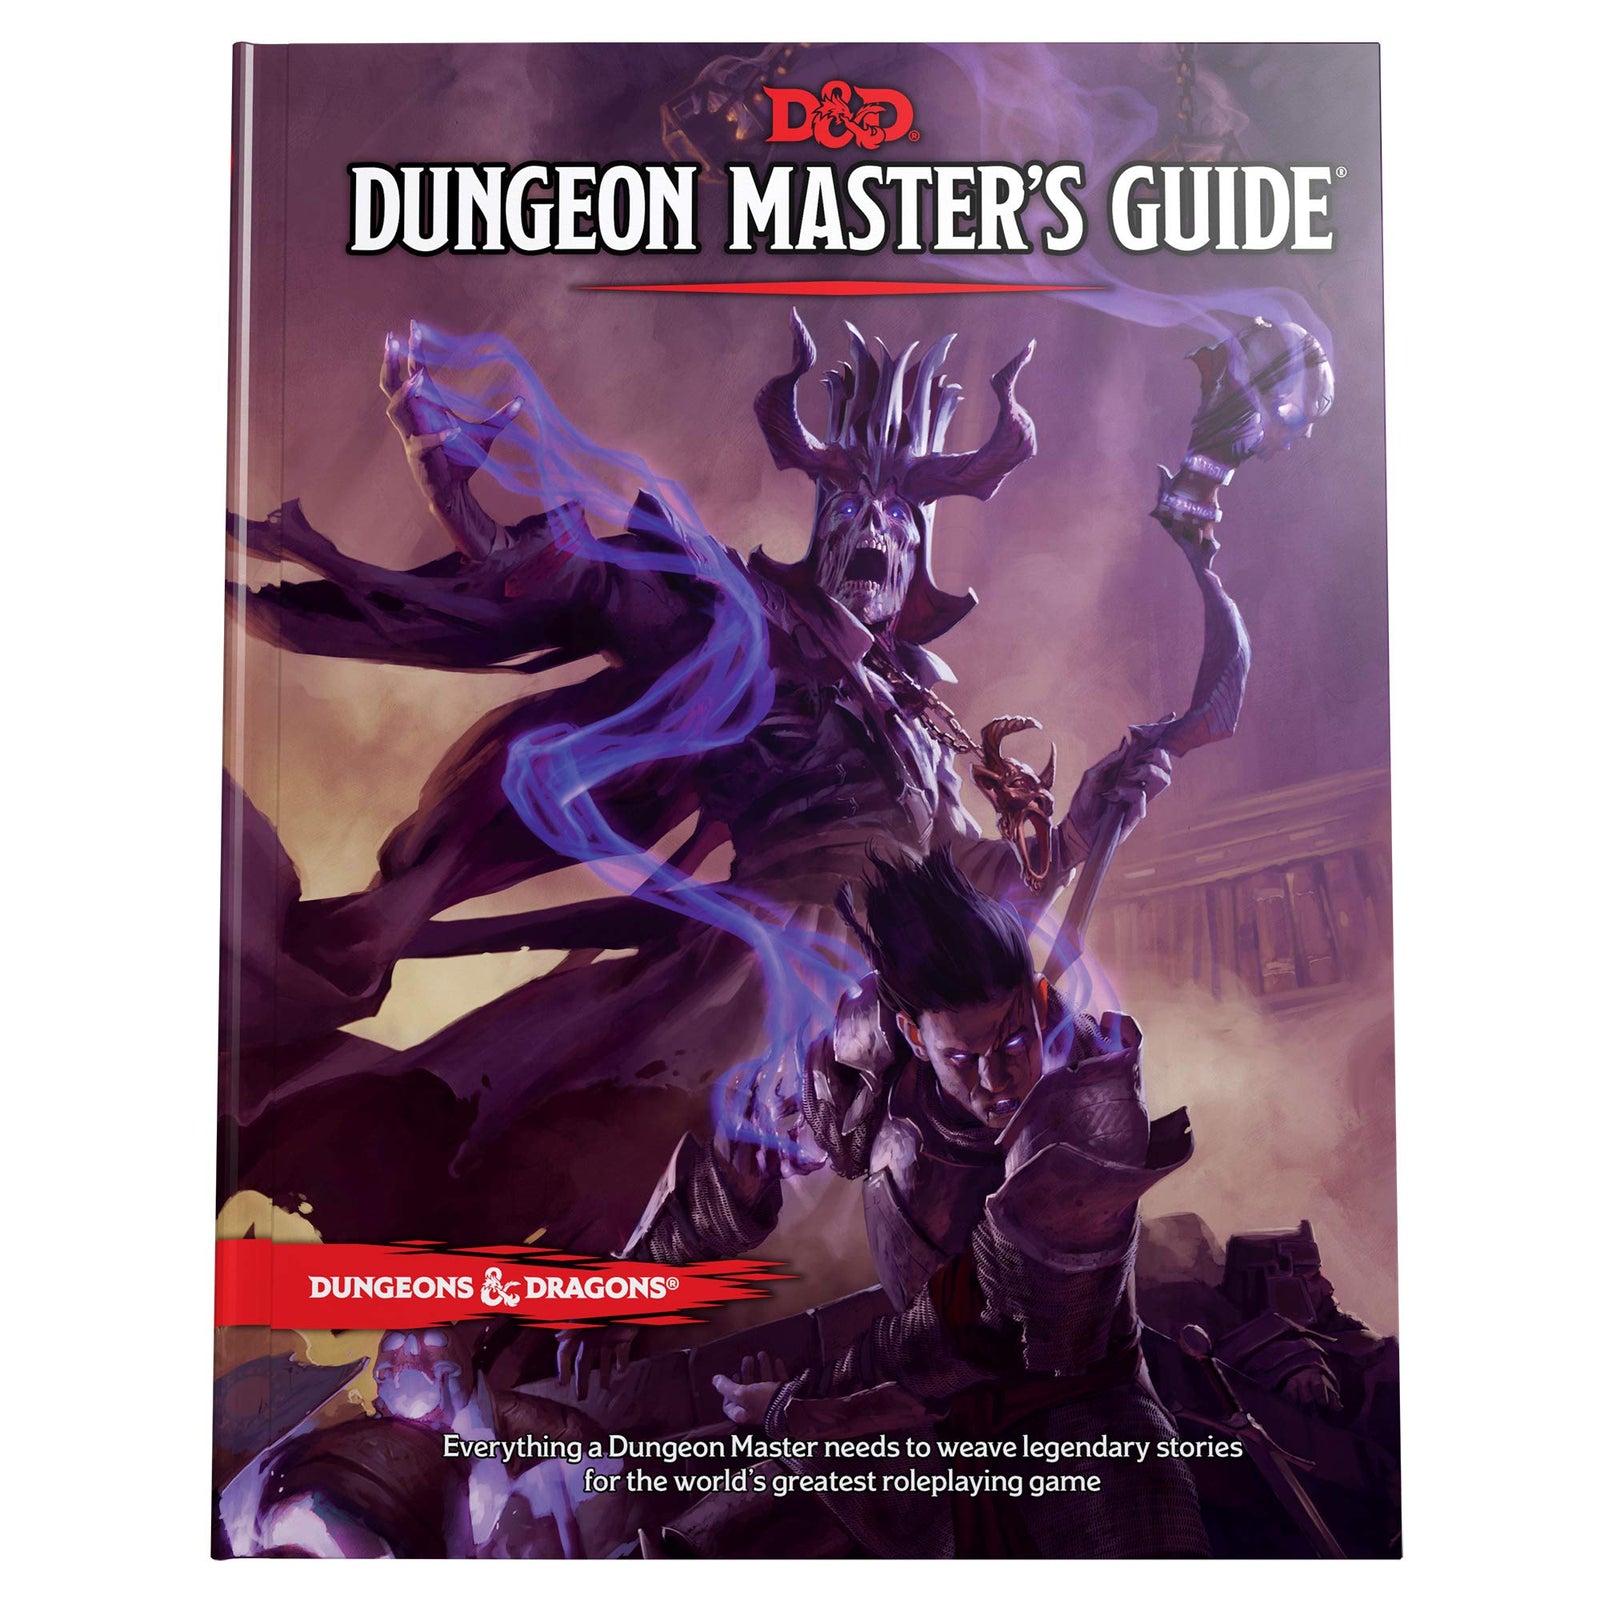 Dungeons and Dragons: Dungeon Master's Guide - The Sword & Board